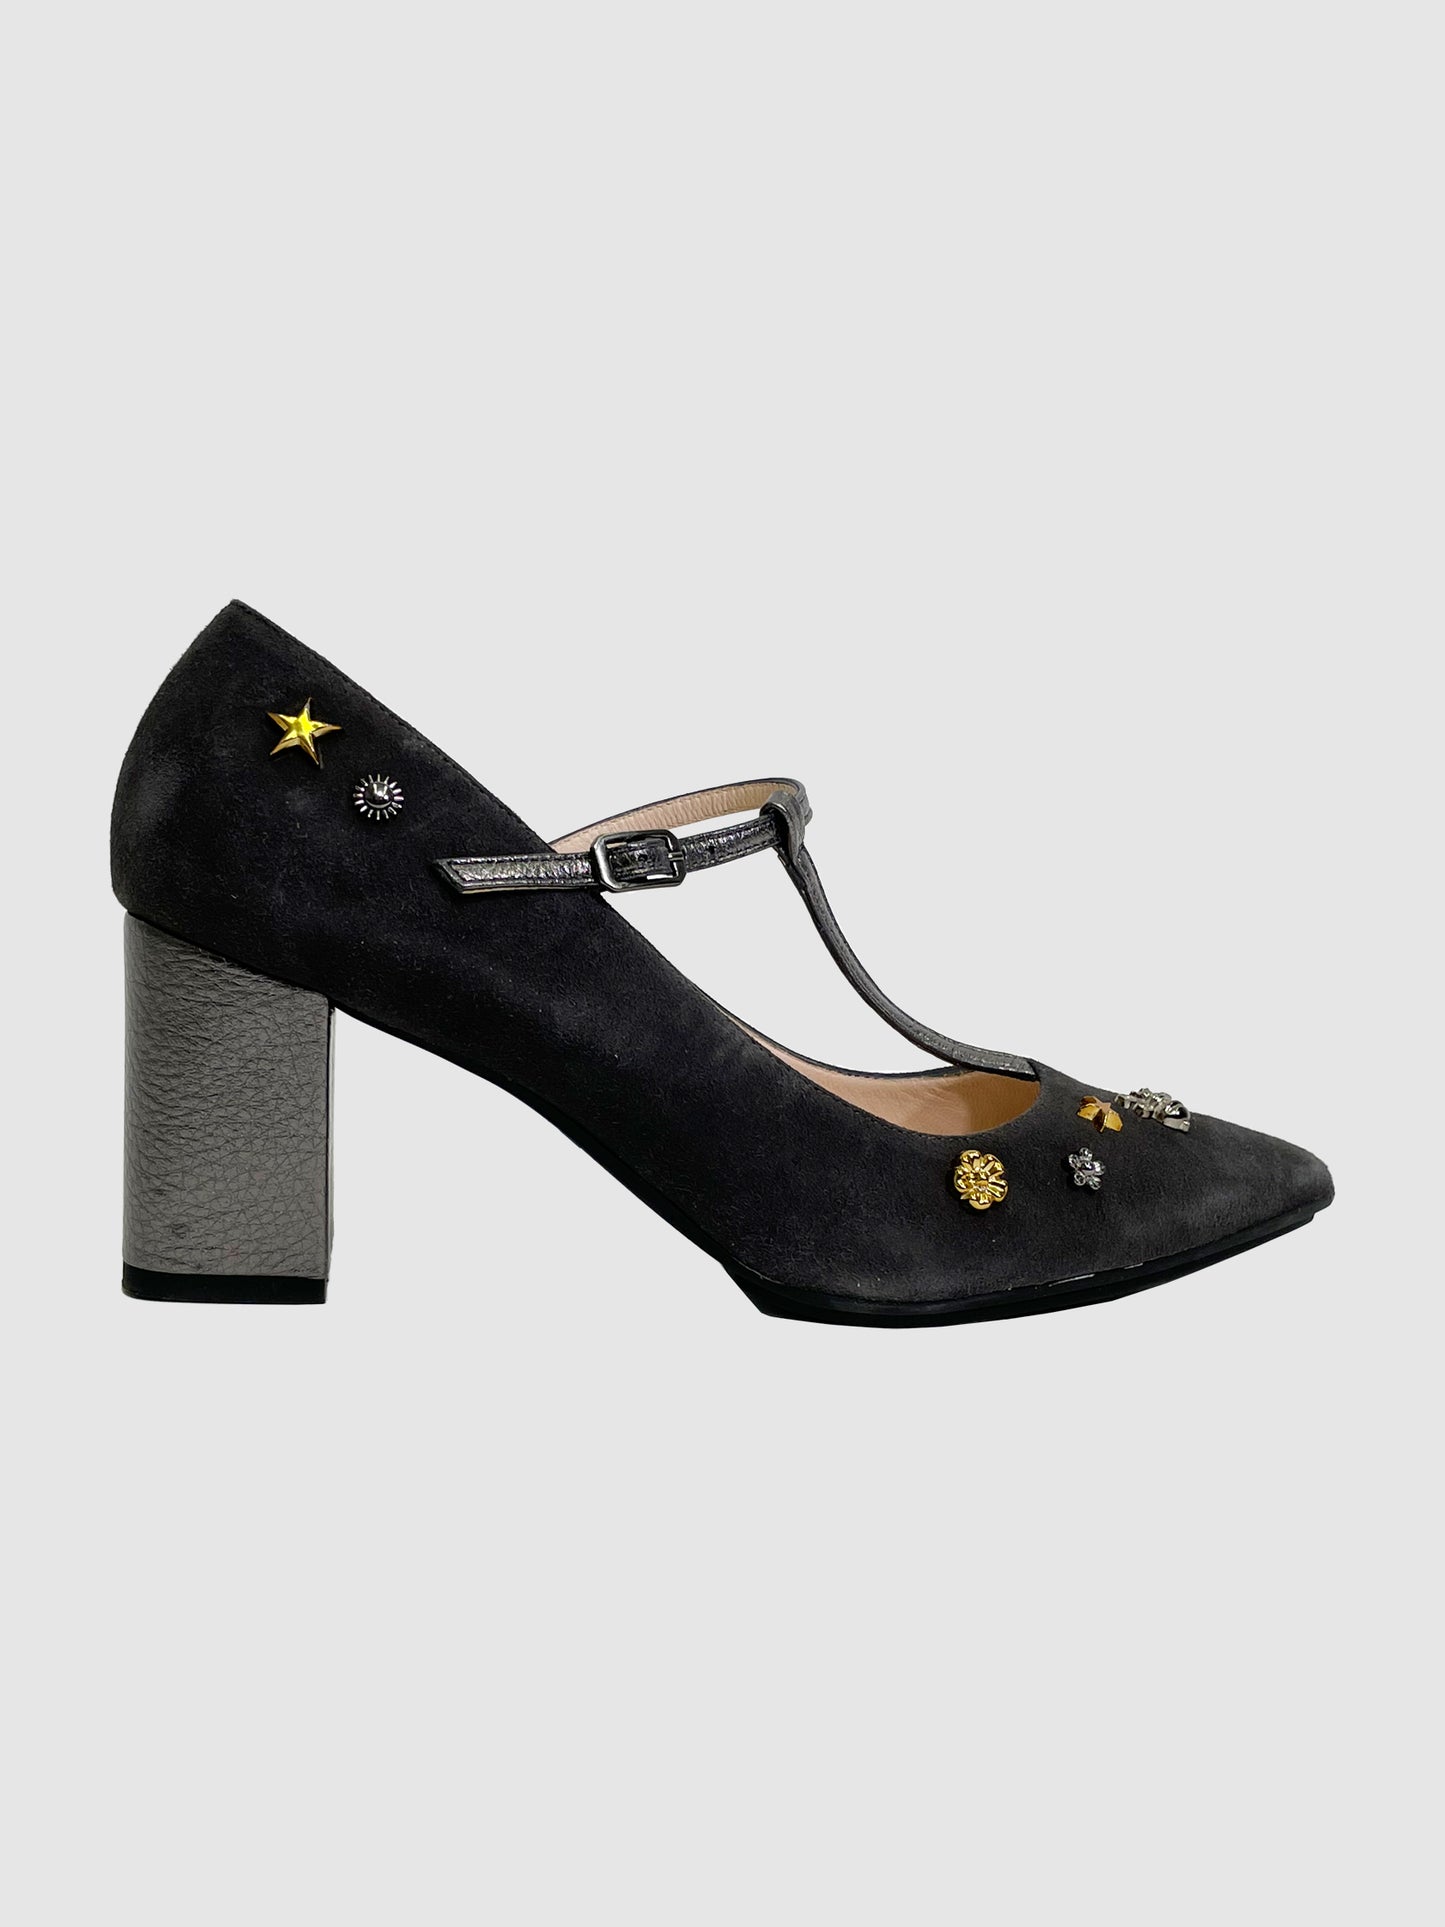 Lodi Suede Pumps with Embellishment - Size 39.5